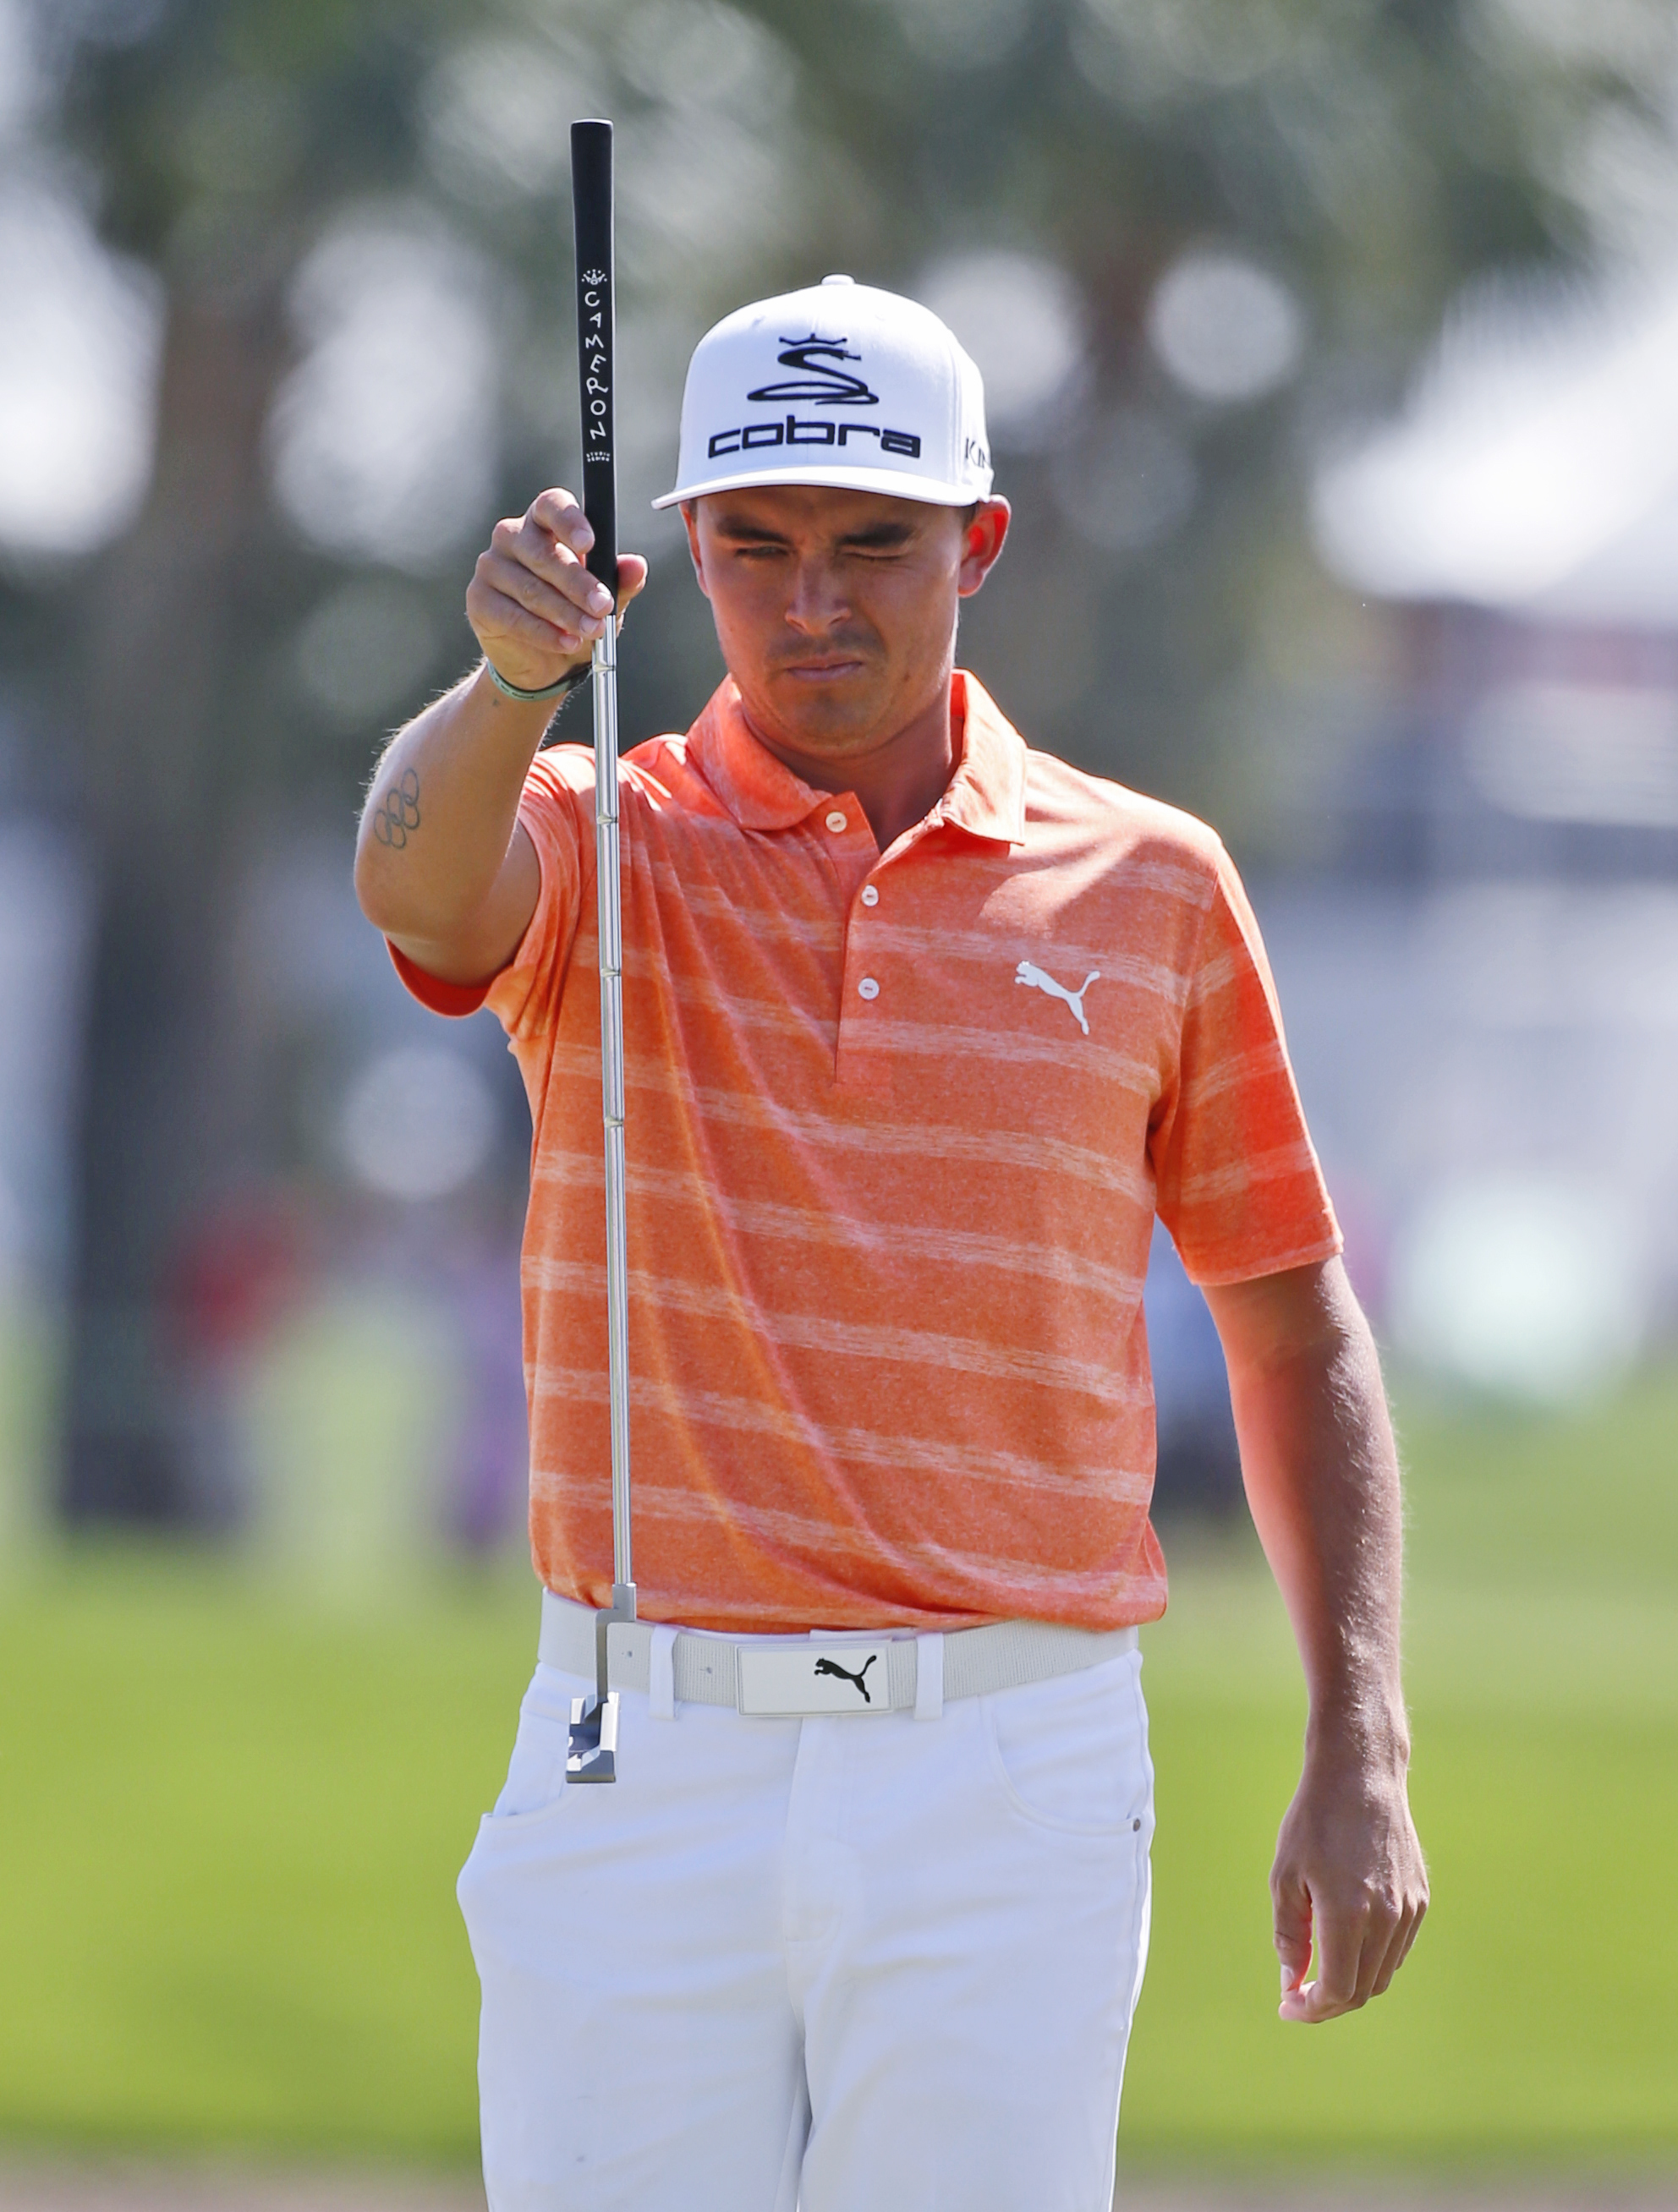 Fowler joins friends in winning and extends youth movement - Sports ...